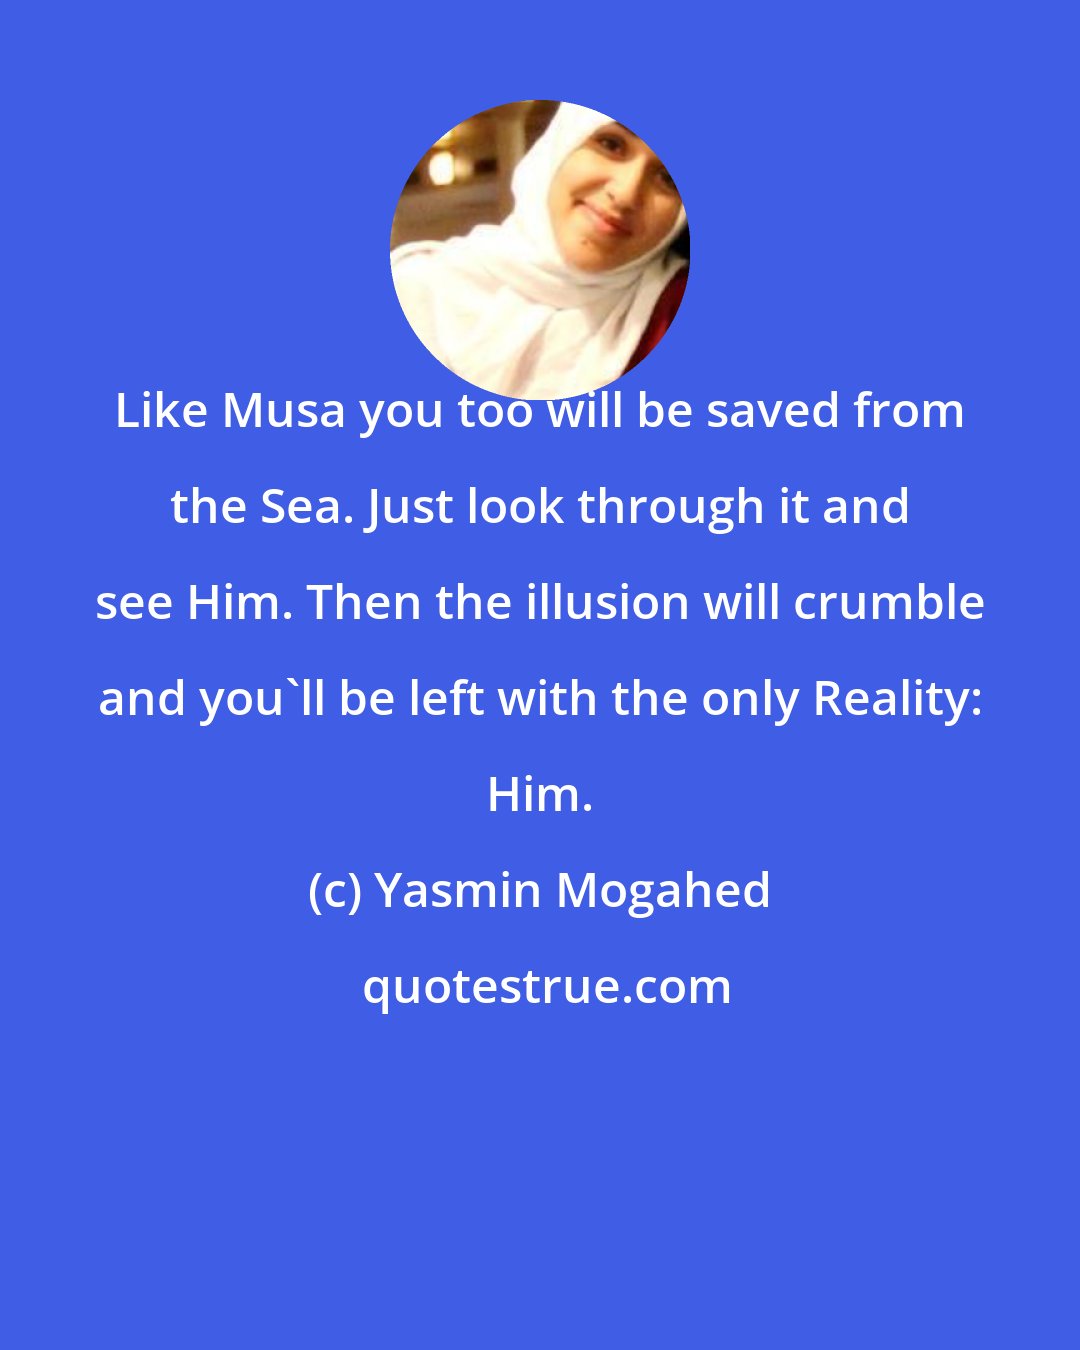 Yasmin Mogahed: Like Musa you too will be saved from the Sea. Just look through it and see Him. Then the illusion will crumble and you'll be left with the only Reality: Him.